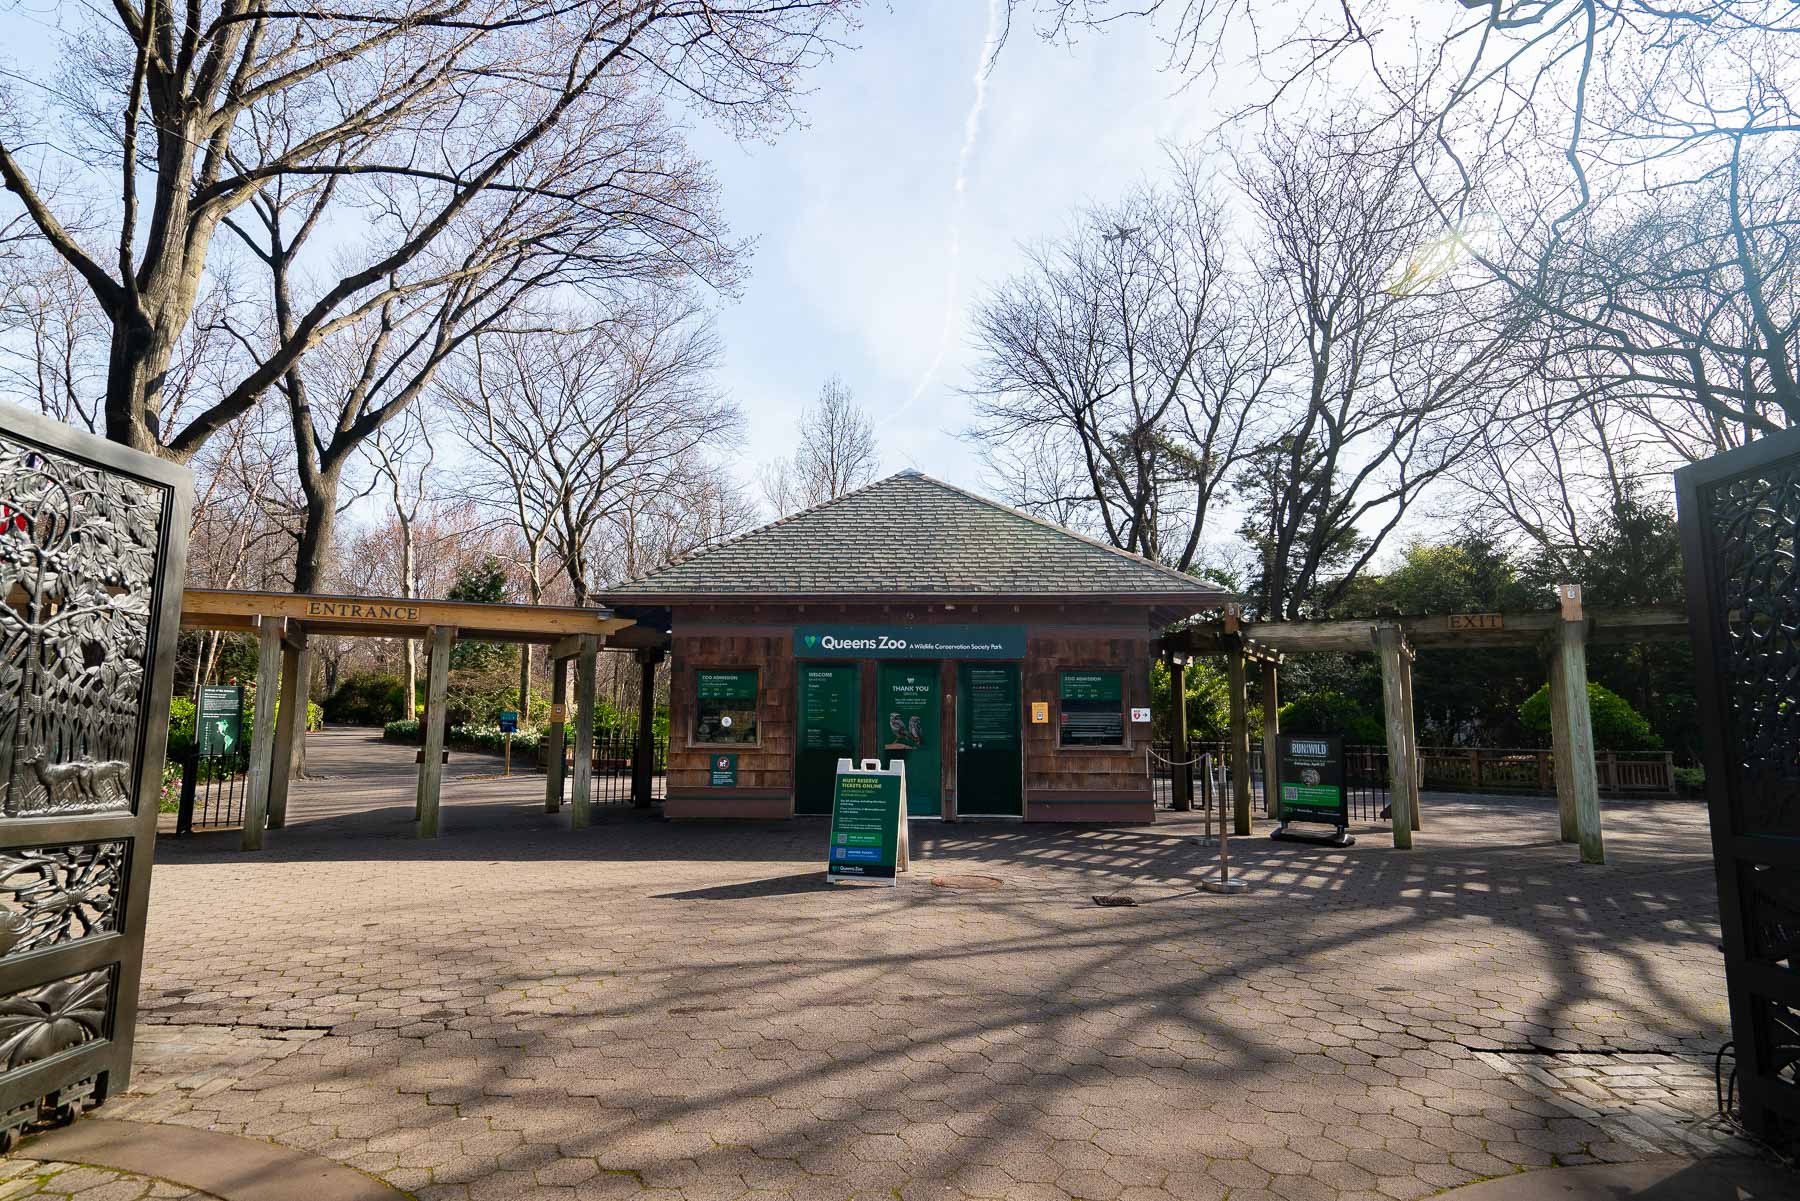 Exterior shot of the Queens Zoo ticket booth with both the entrance and exit visible from the gate